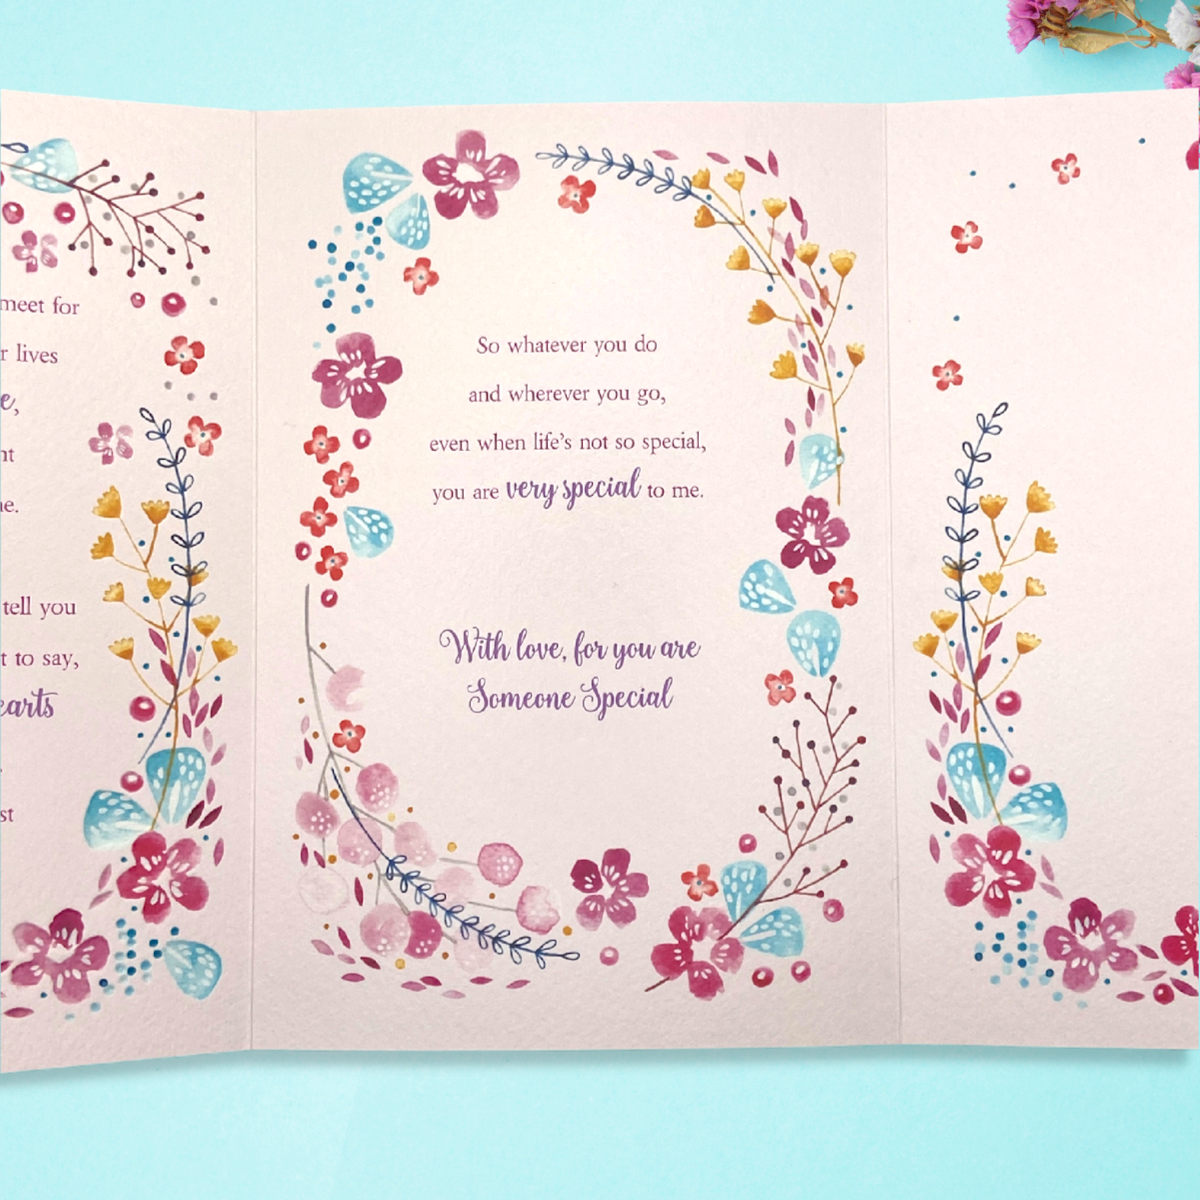 Last two pages with more floral decorations and verse